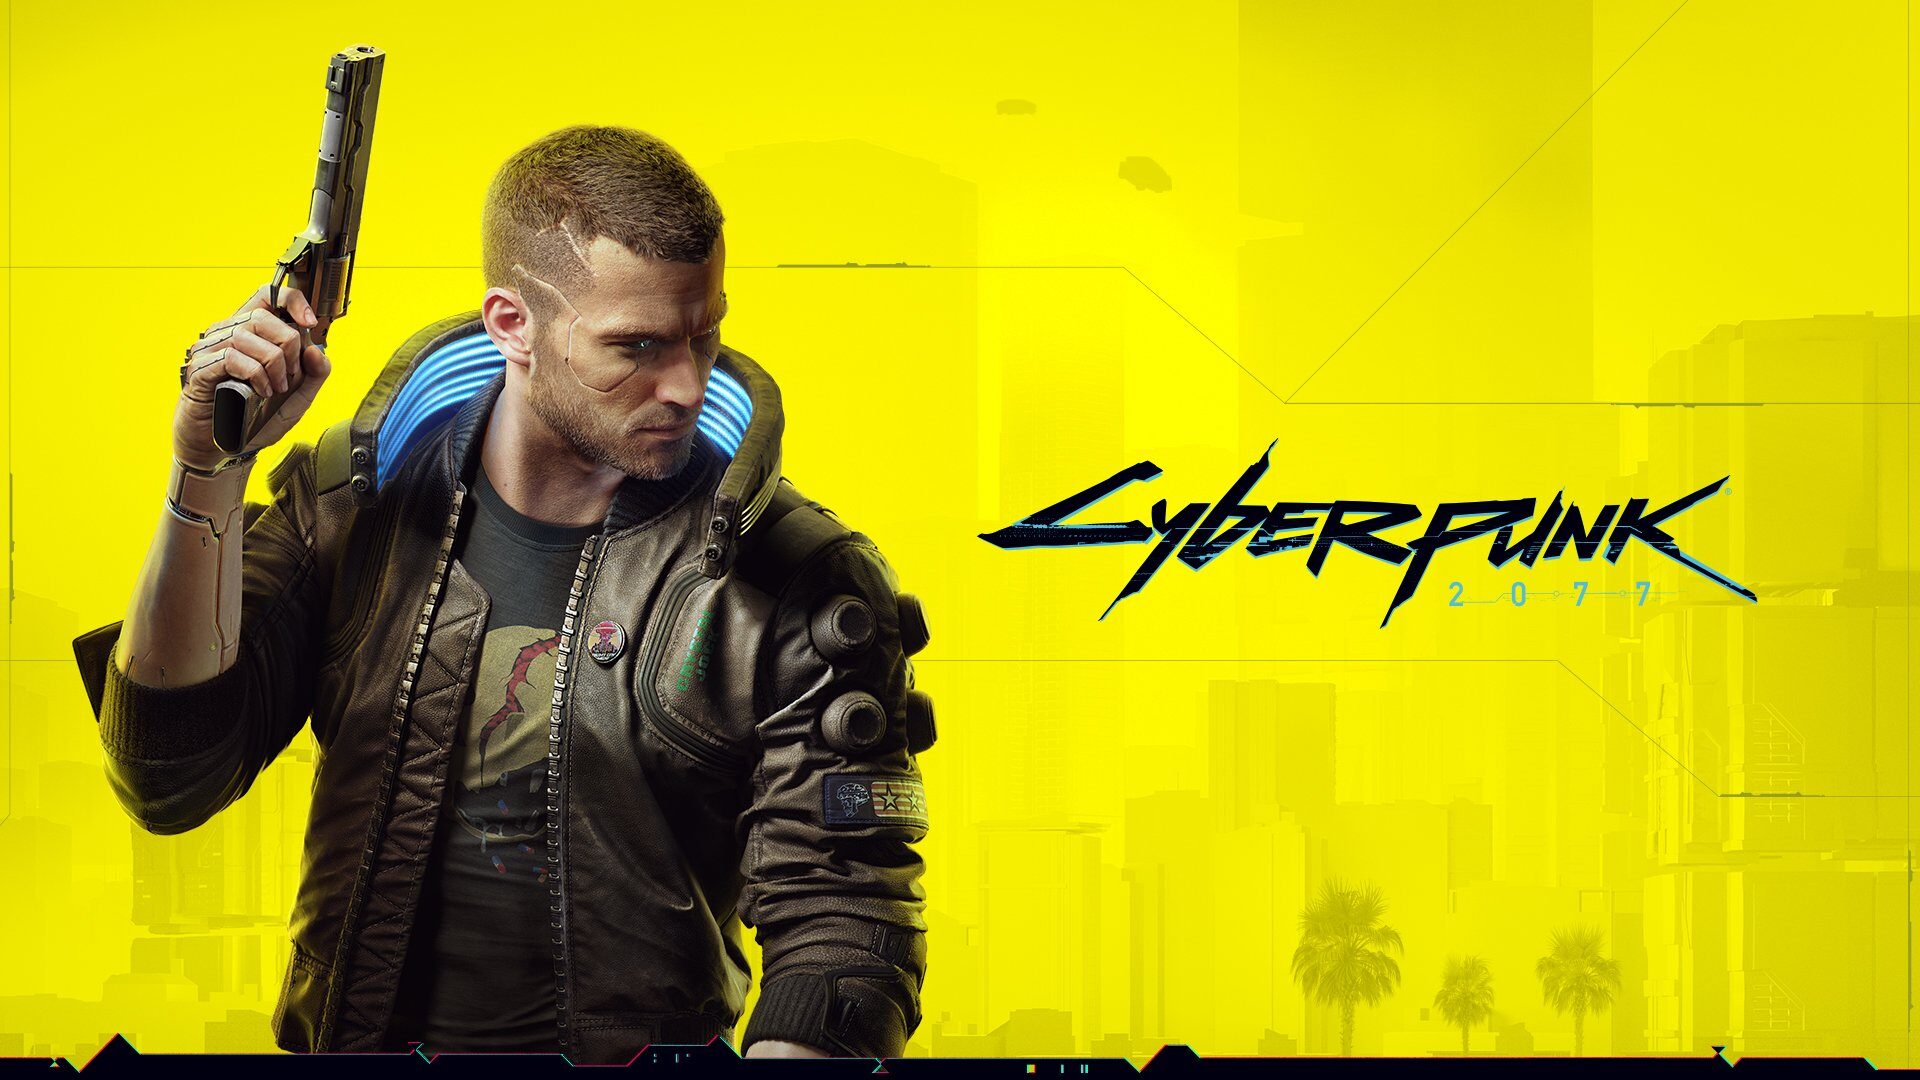 A yellow wallpaper with futuristic text that says Cyberpunk. A cyborg looking man is looking off to the side, holding a futuristic pistol and wearing combat clothing, while also rocking an awesome shaved hairstyle. He is epic. He is the future.